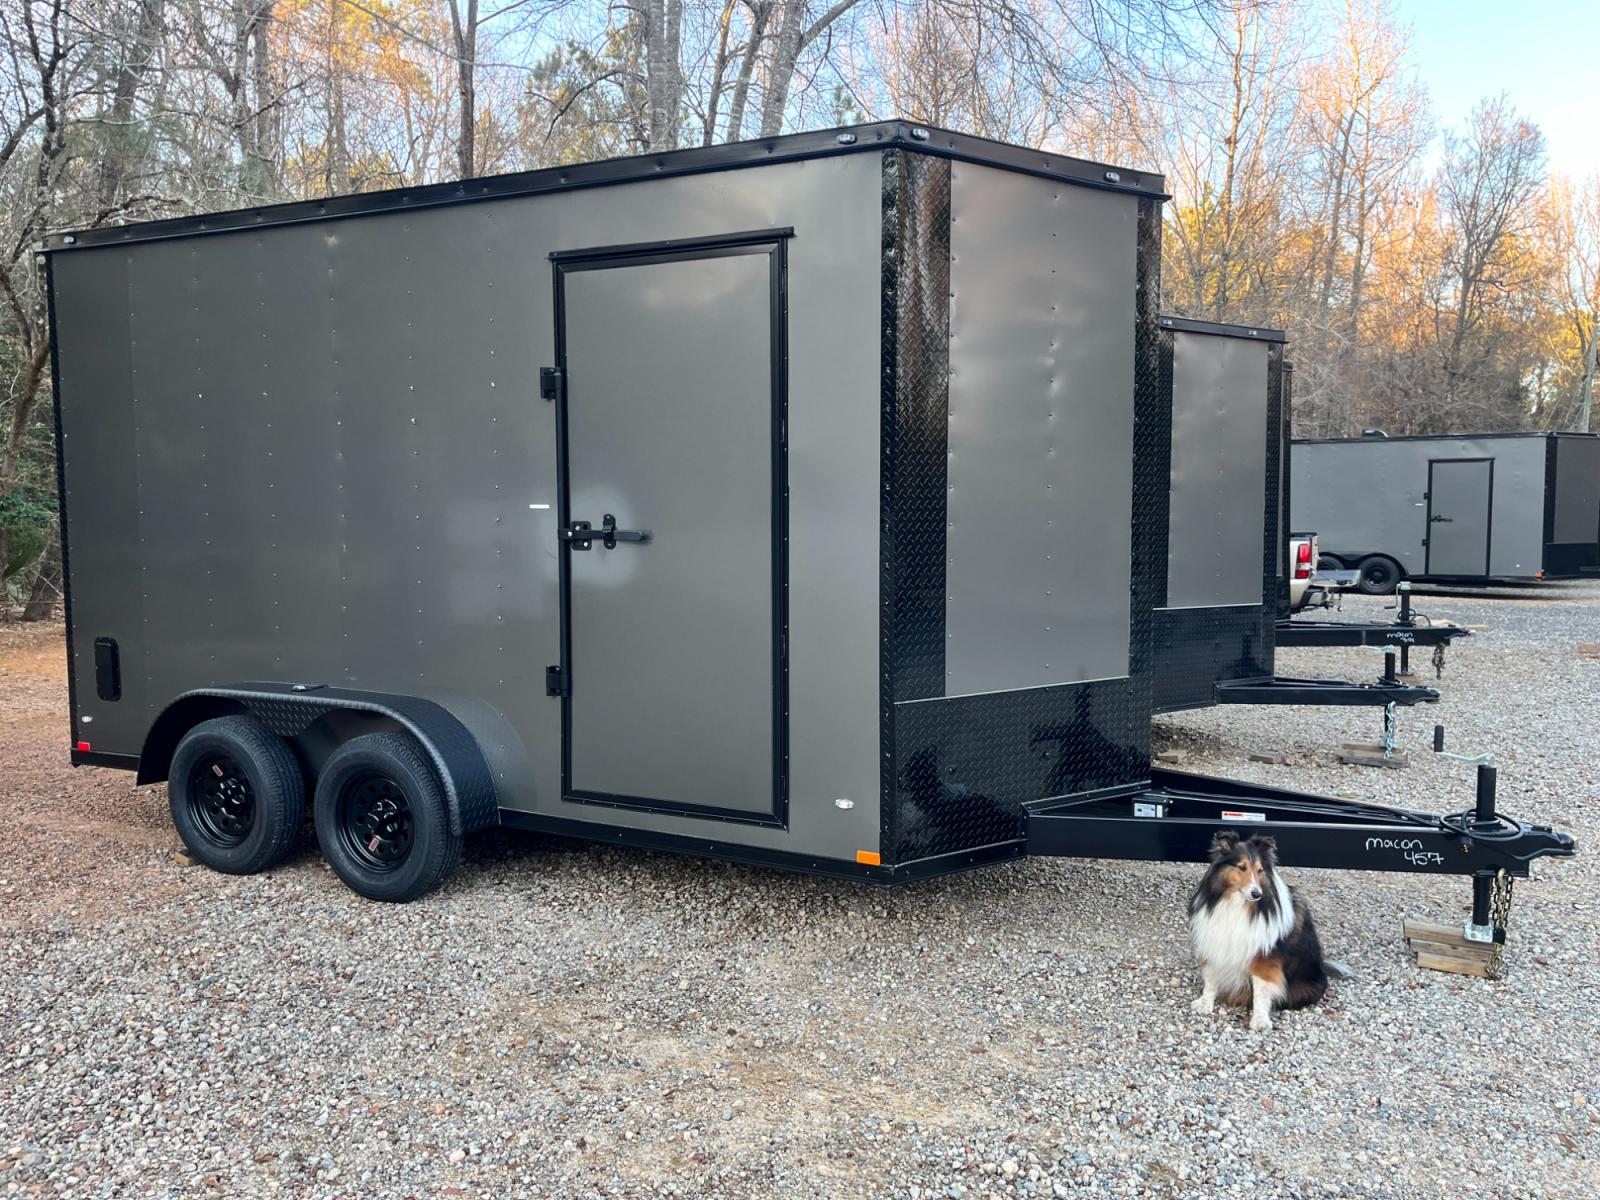 2023 .080 Charcoal Metallic w/Black Out Pkg. Elite Cargo 7ft X 14ft Tandem , located at 1330 Rainey Rd., Macon, 31220, (478) 960-1044, 32.845638, -83.778687 - Brand New 2023 "Top of the Line" Elite Cargo Brand Trailer Made in South Ga. Awesome 7ft X 14ft Tandem Enclosed Cycle Hauler & Cargo Trailer! Taller Inside Height is 7ft 6" Tall Inside & Ramp Door Clearance is 7ft! .080 Thick Metallic Charcoal Aluminum Skin is Awesome! Black Out Pkg Trim, Wider - Photo #0